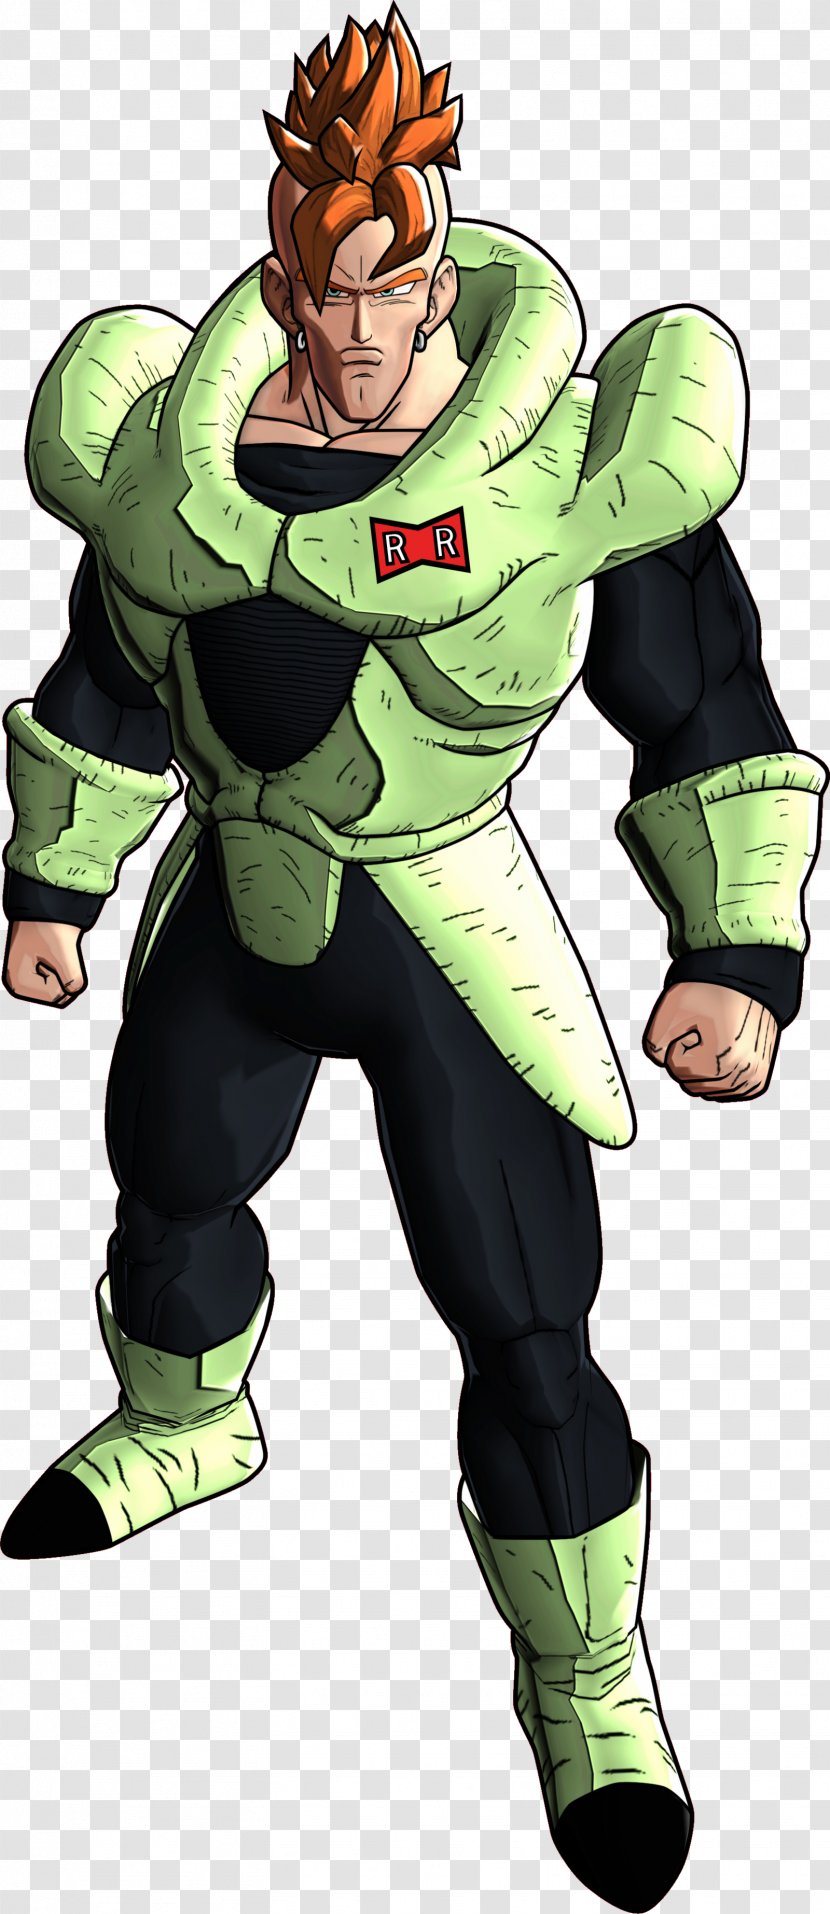 Dragon Ball Z: Battle Of Z Goku Trunks Android 16 - Sheamus Transparent PNG